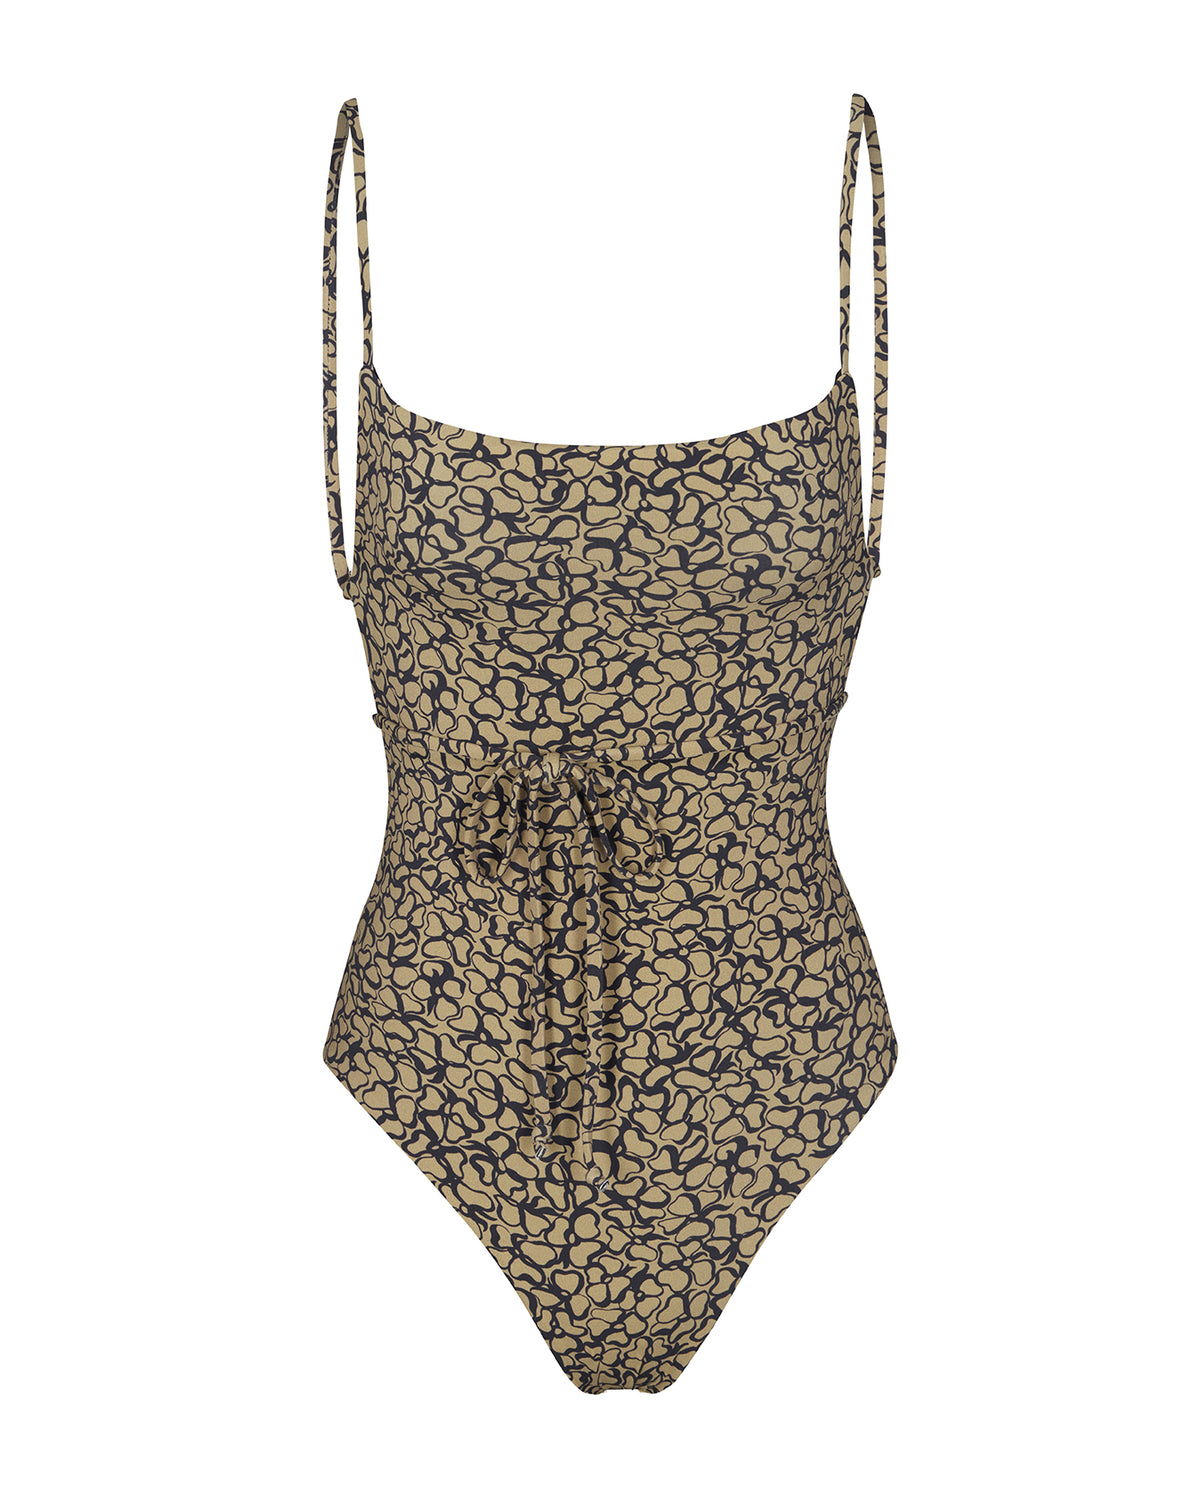 The K.M. Tie One Piece - Black Infinity Floral